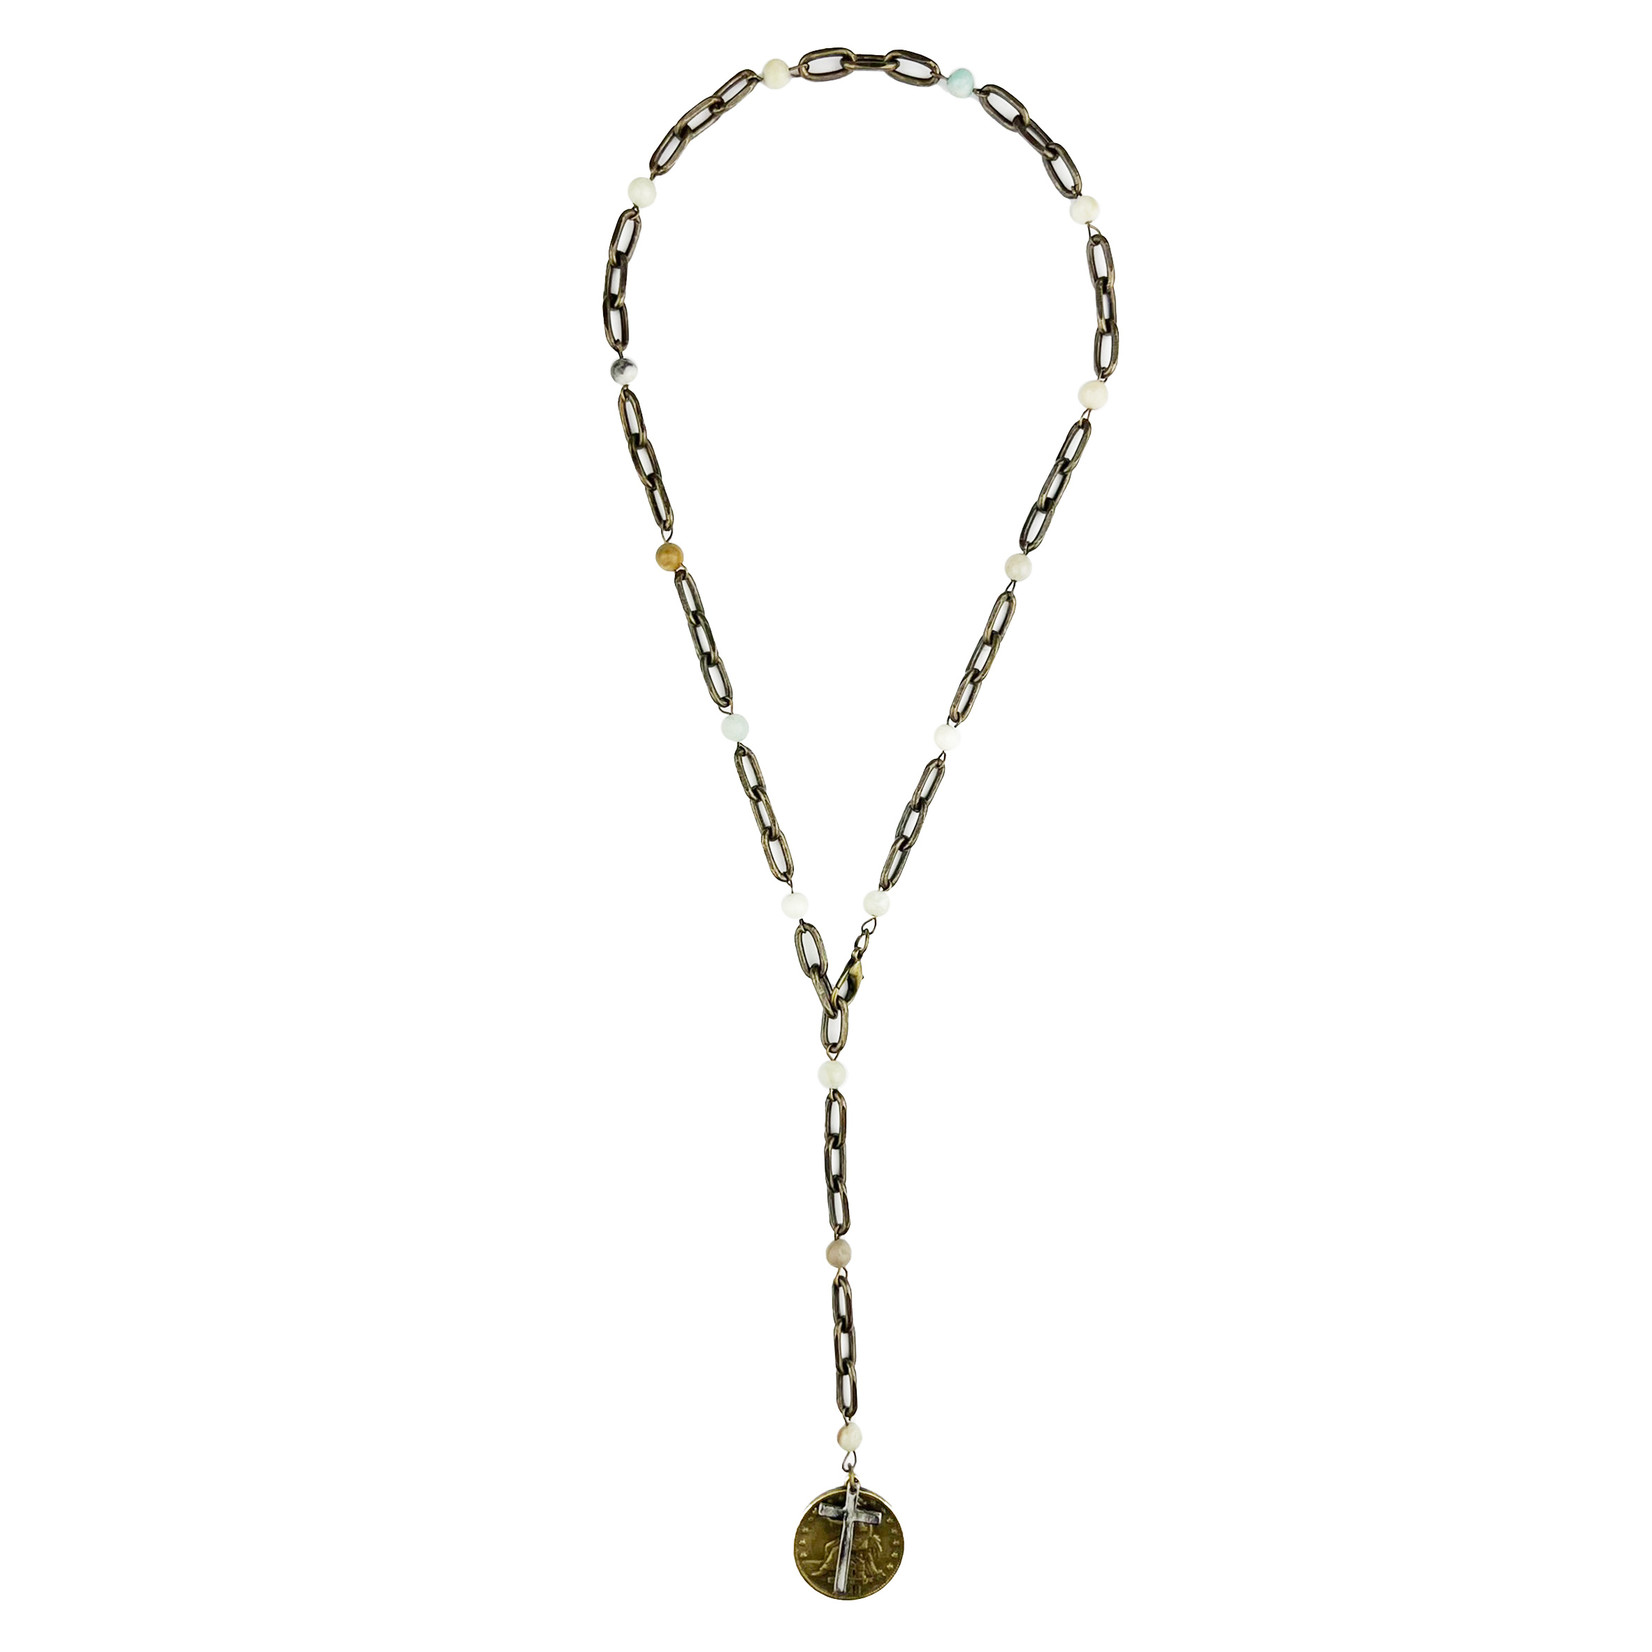 Adjustable Lariat Necklace with Pendant